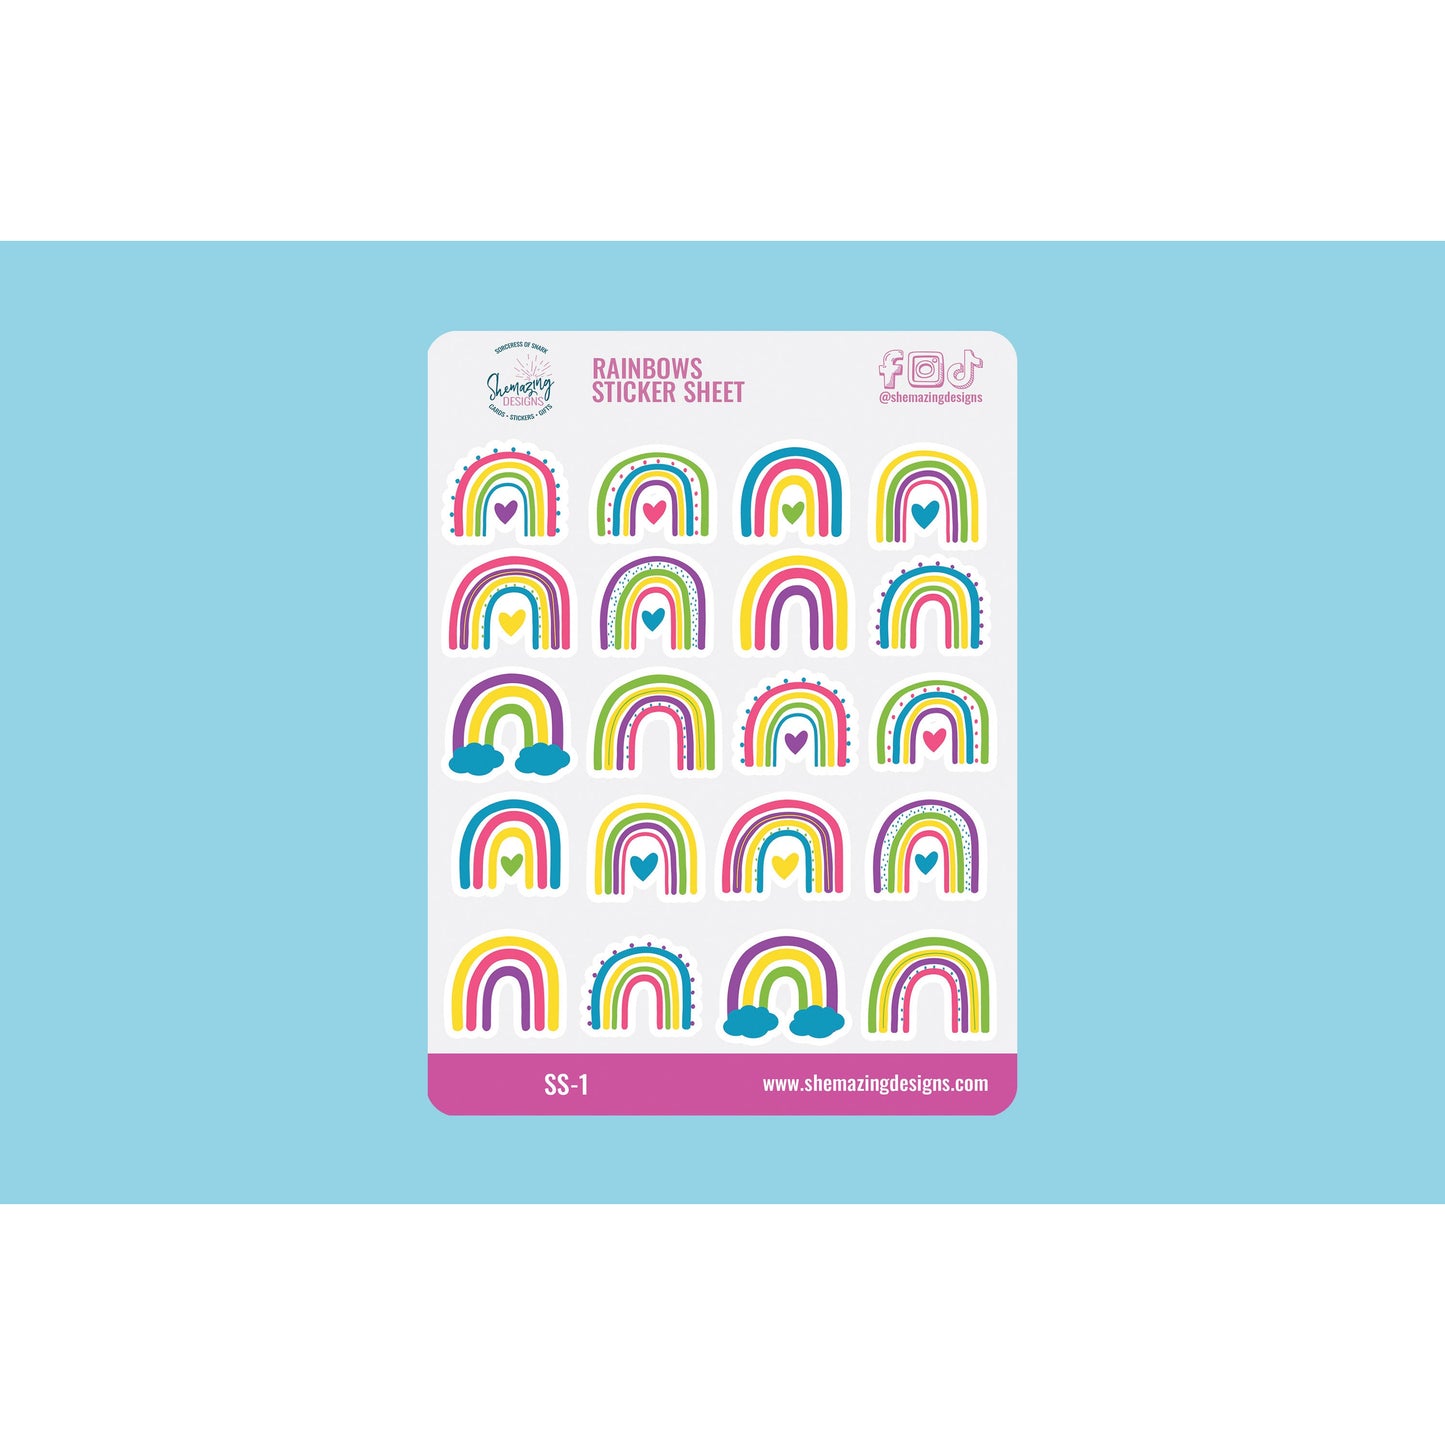 Mix and Match Sticker Sheets - Buy MORE, SAVE MORE $$$